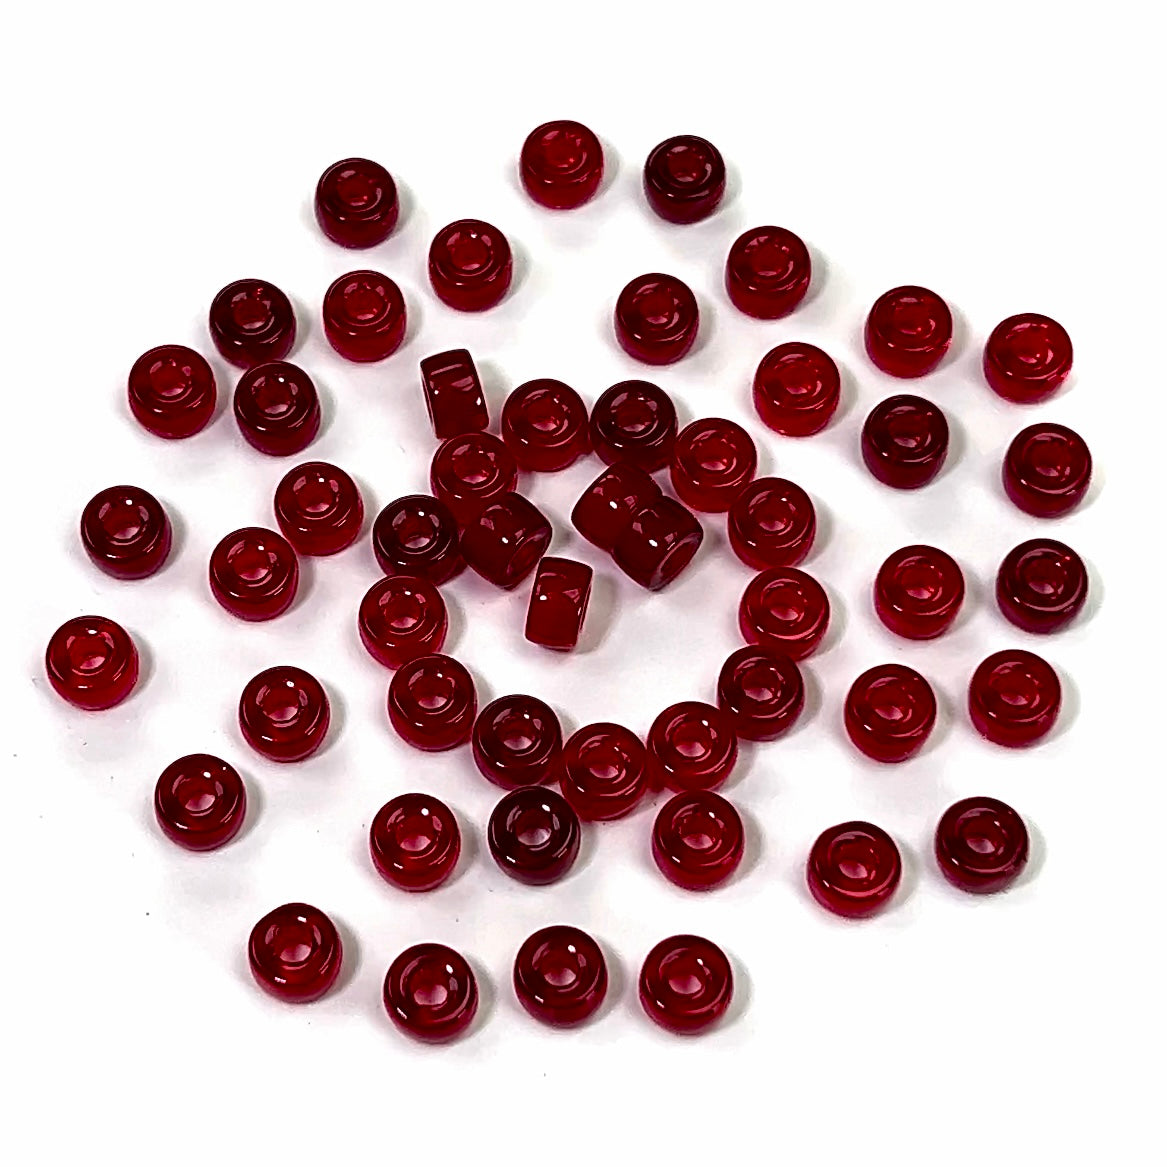 Czech Glass Druk Large Hole Beads in size 6mm, Siam Red MIX color, 50pcs, J089